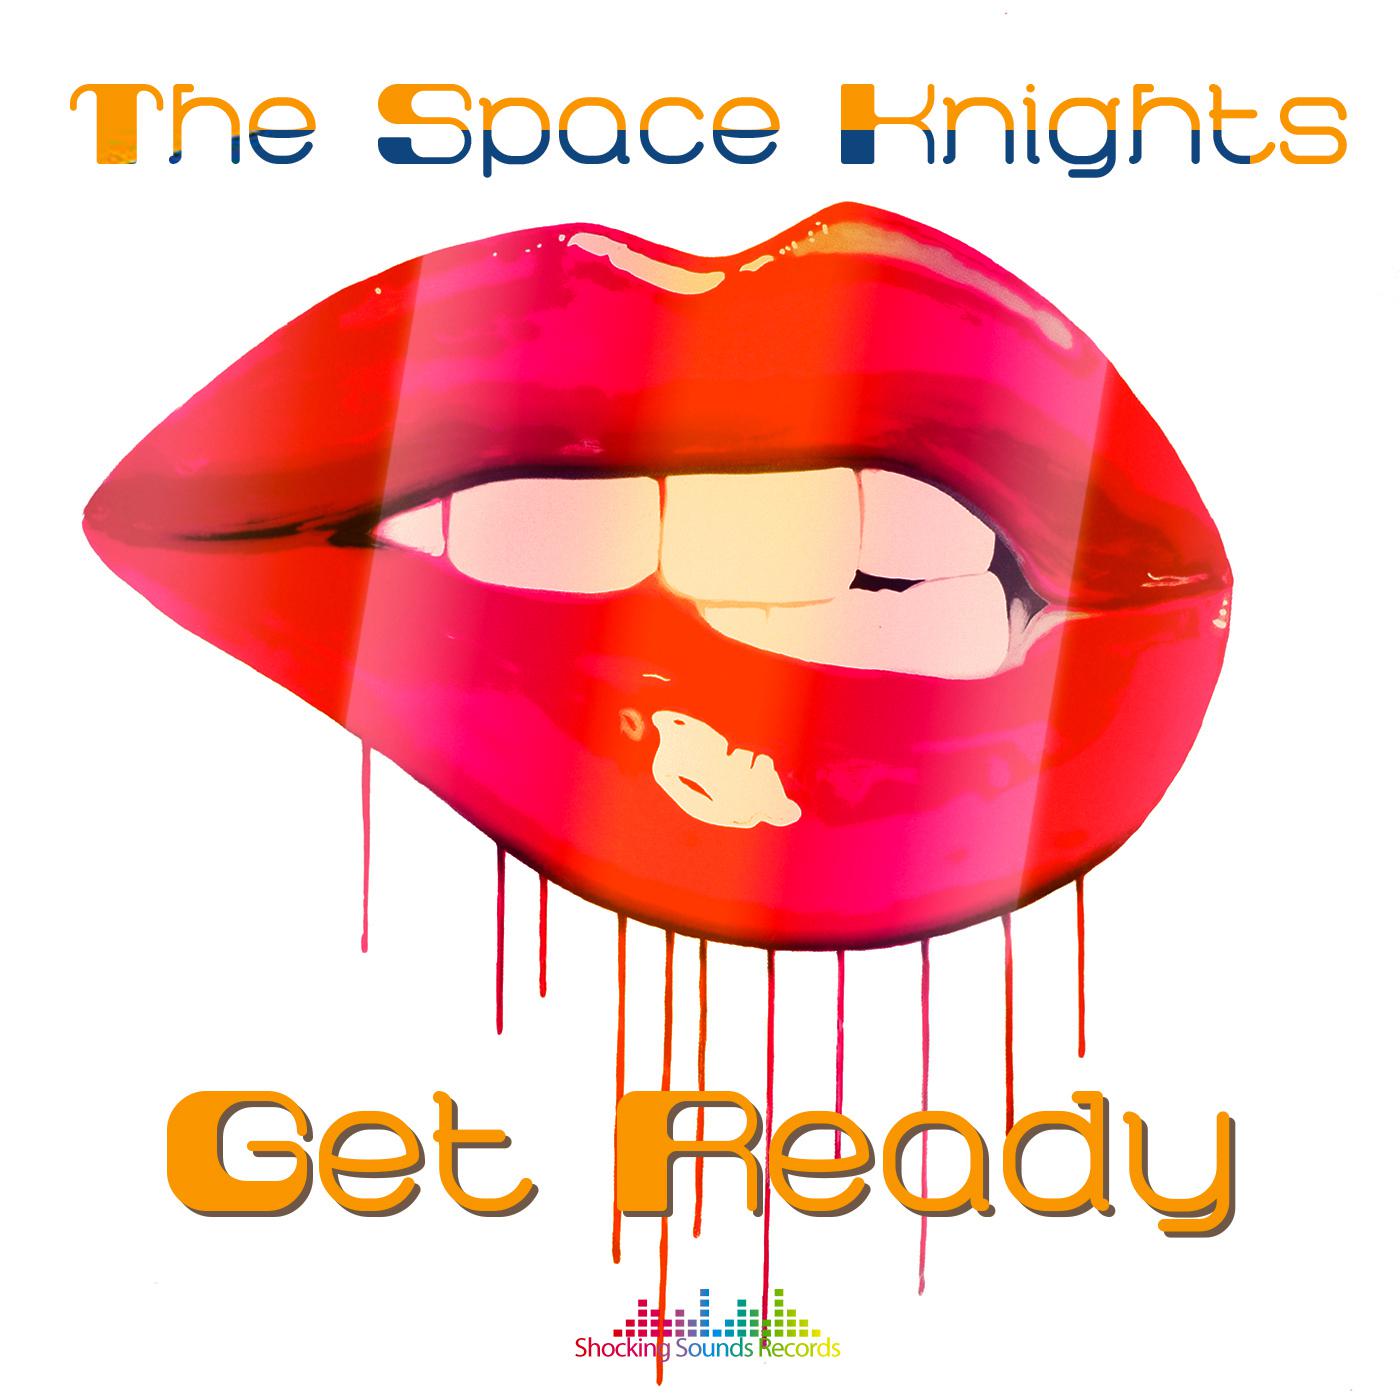 The Space Knights - Get Ready (Original Mix)